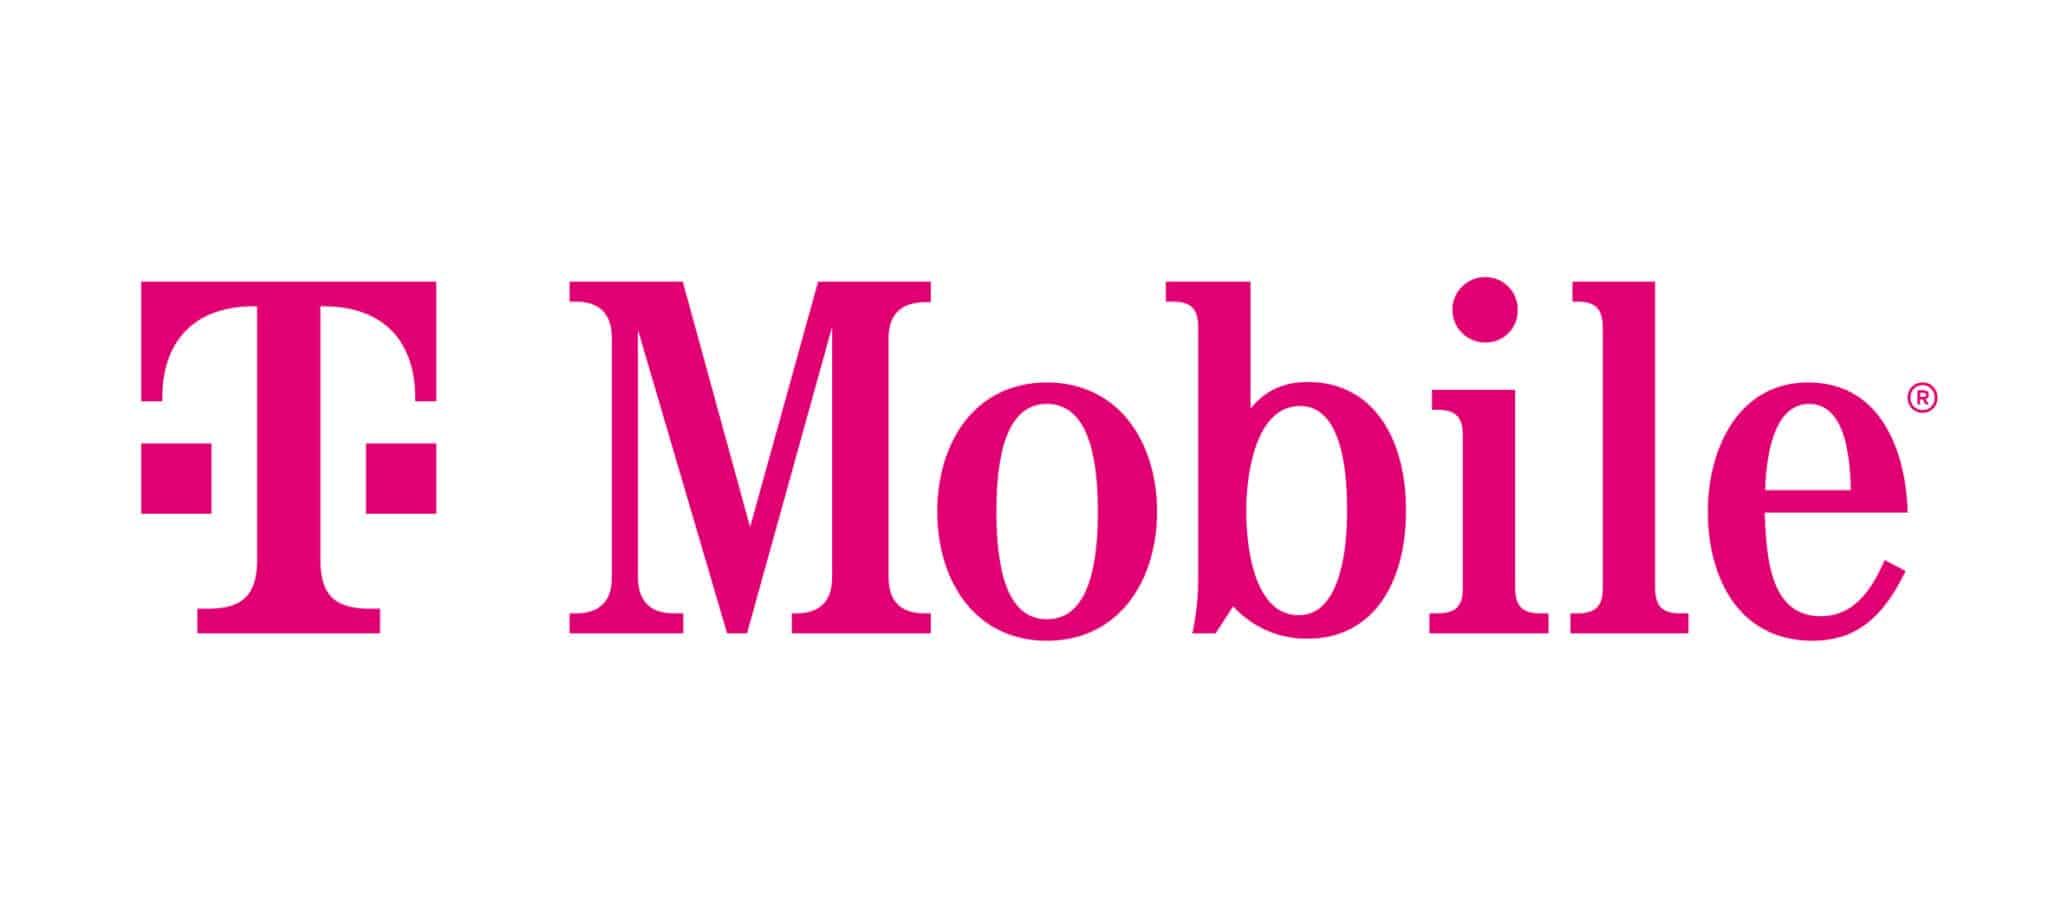 prepaid vs contract cell plans: T Mobile